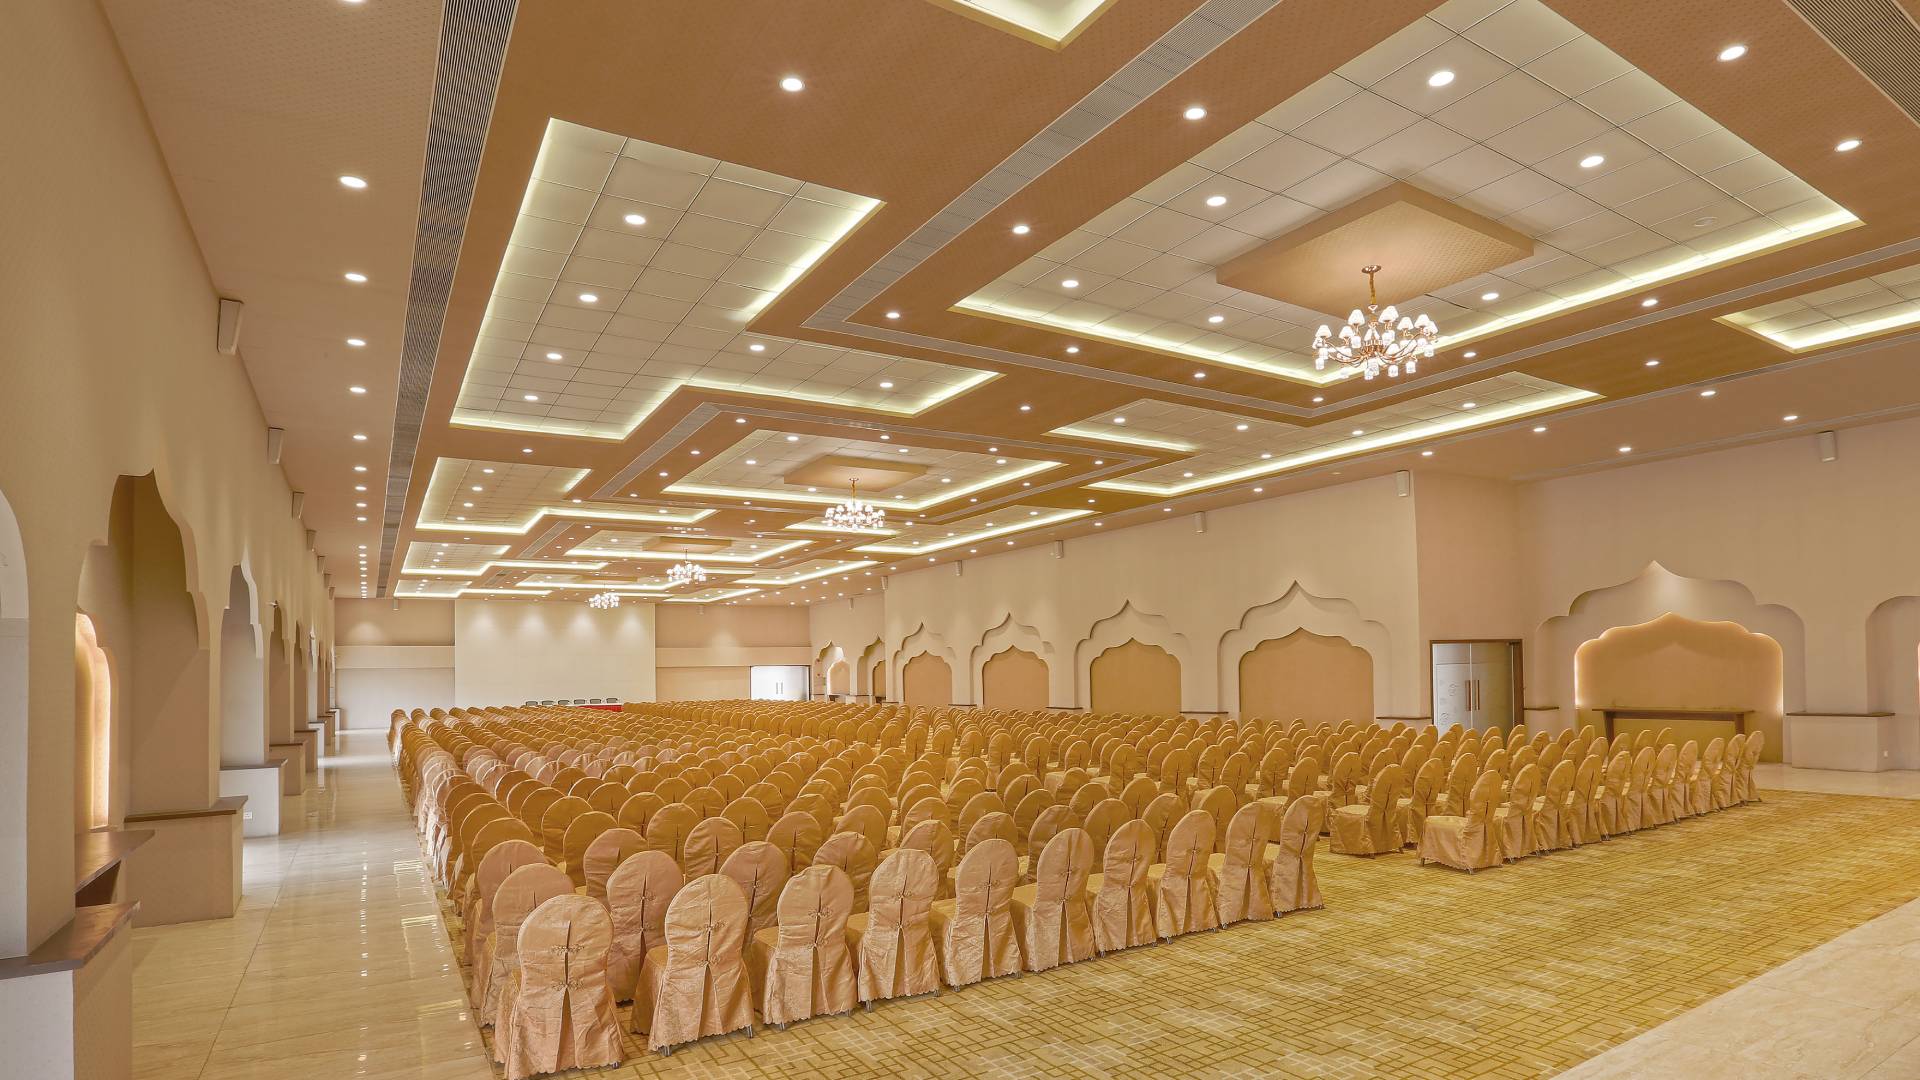 The Kohinoor - Ac Banquet Hall at Sunny's World Pune (2)